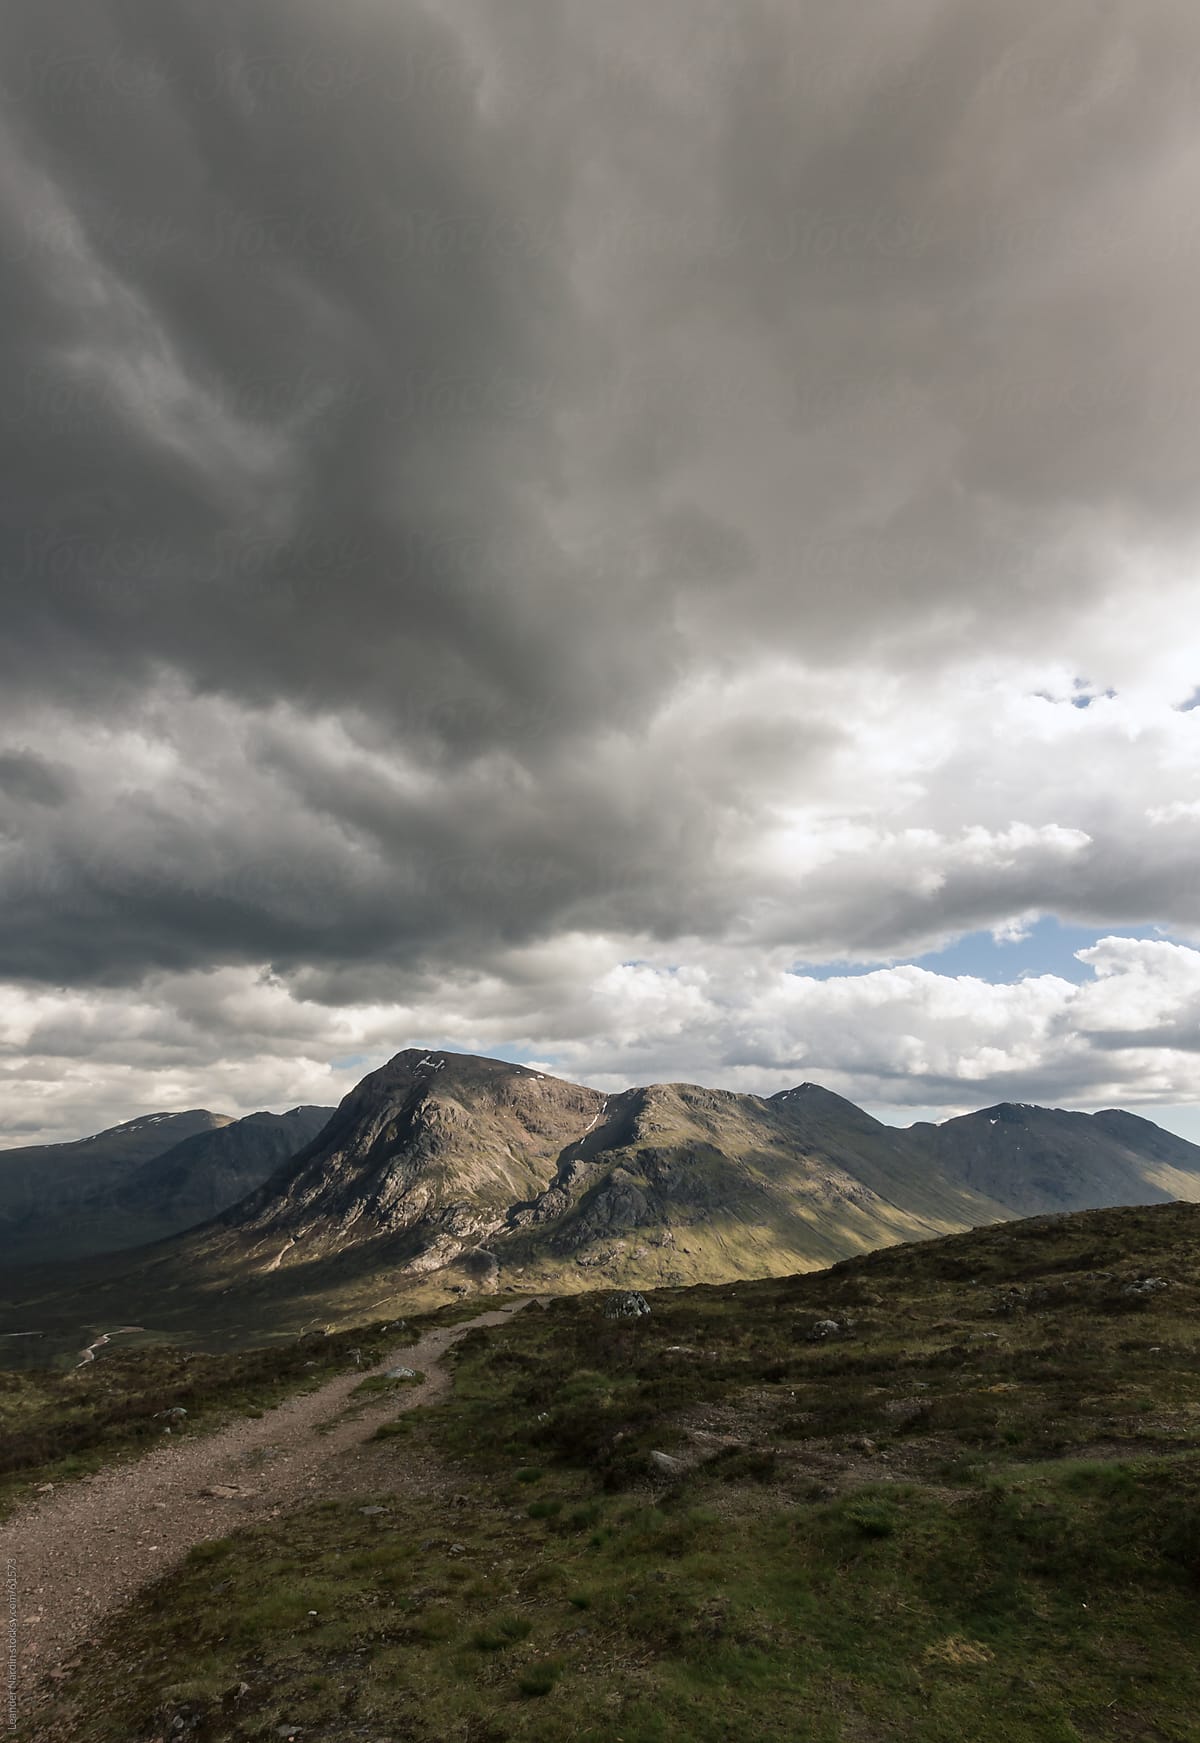 dramatic scenery in the scottish highlands